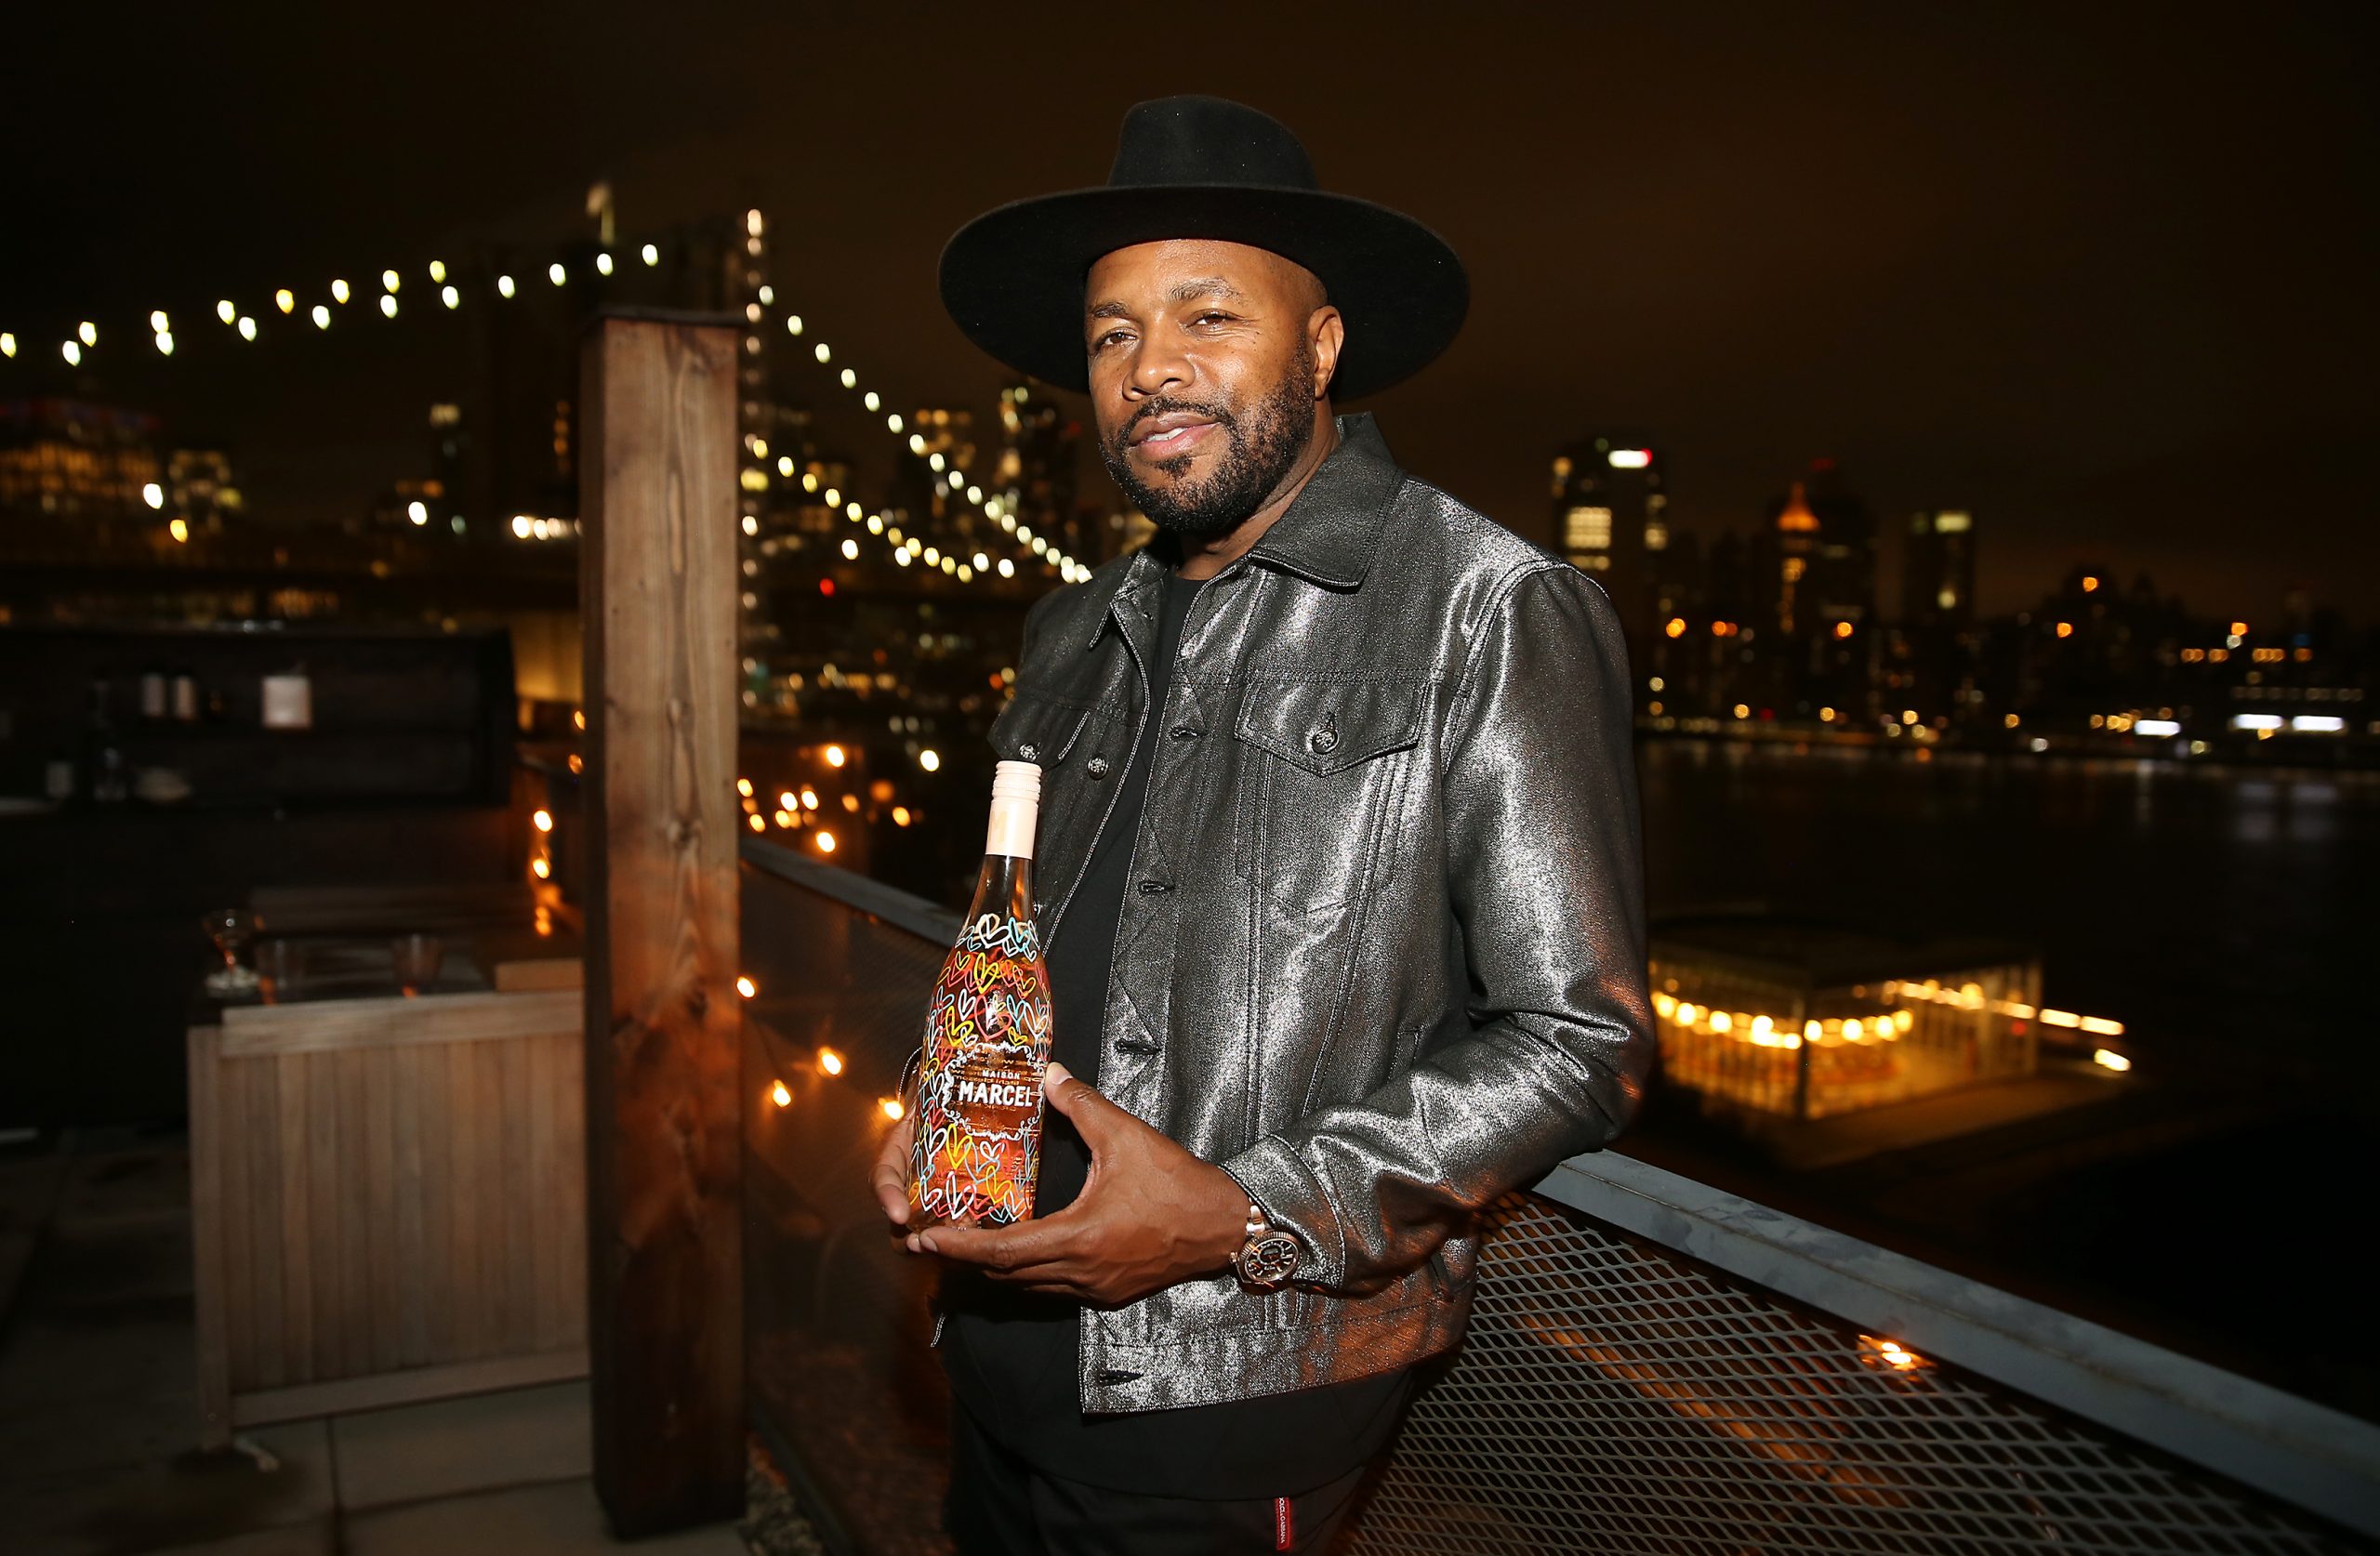 D-Nice holding bottle of Maison Marcel: Rapper and DJ D-Nice invests in French wine label